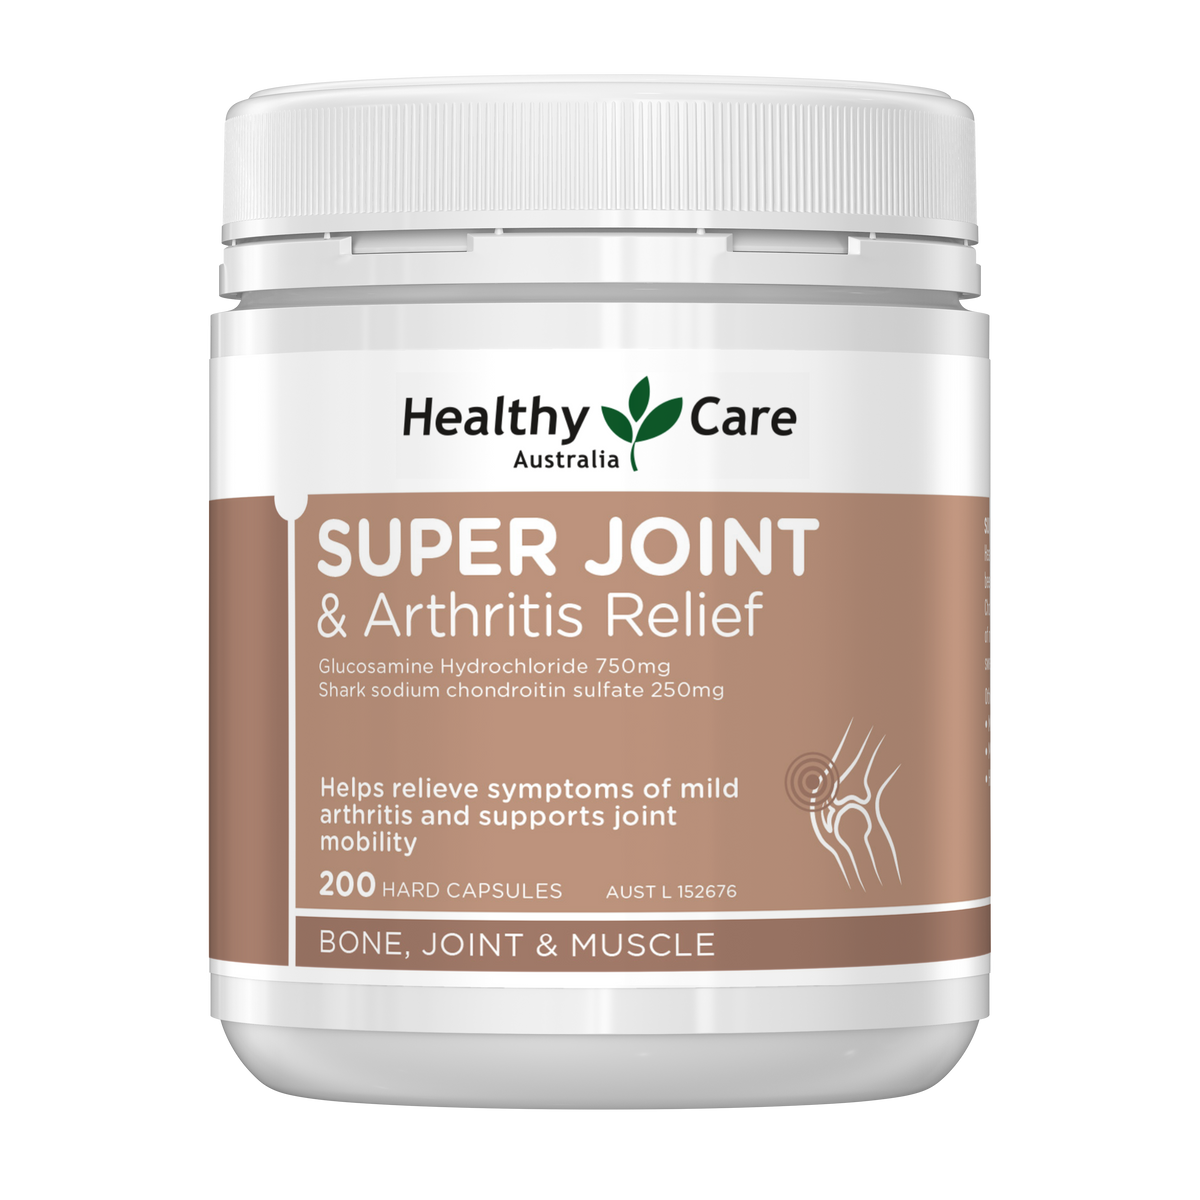 Healthy Care Super Joint & Arthritis Relief - 200 Capsules